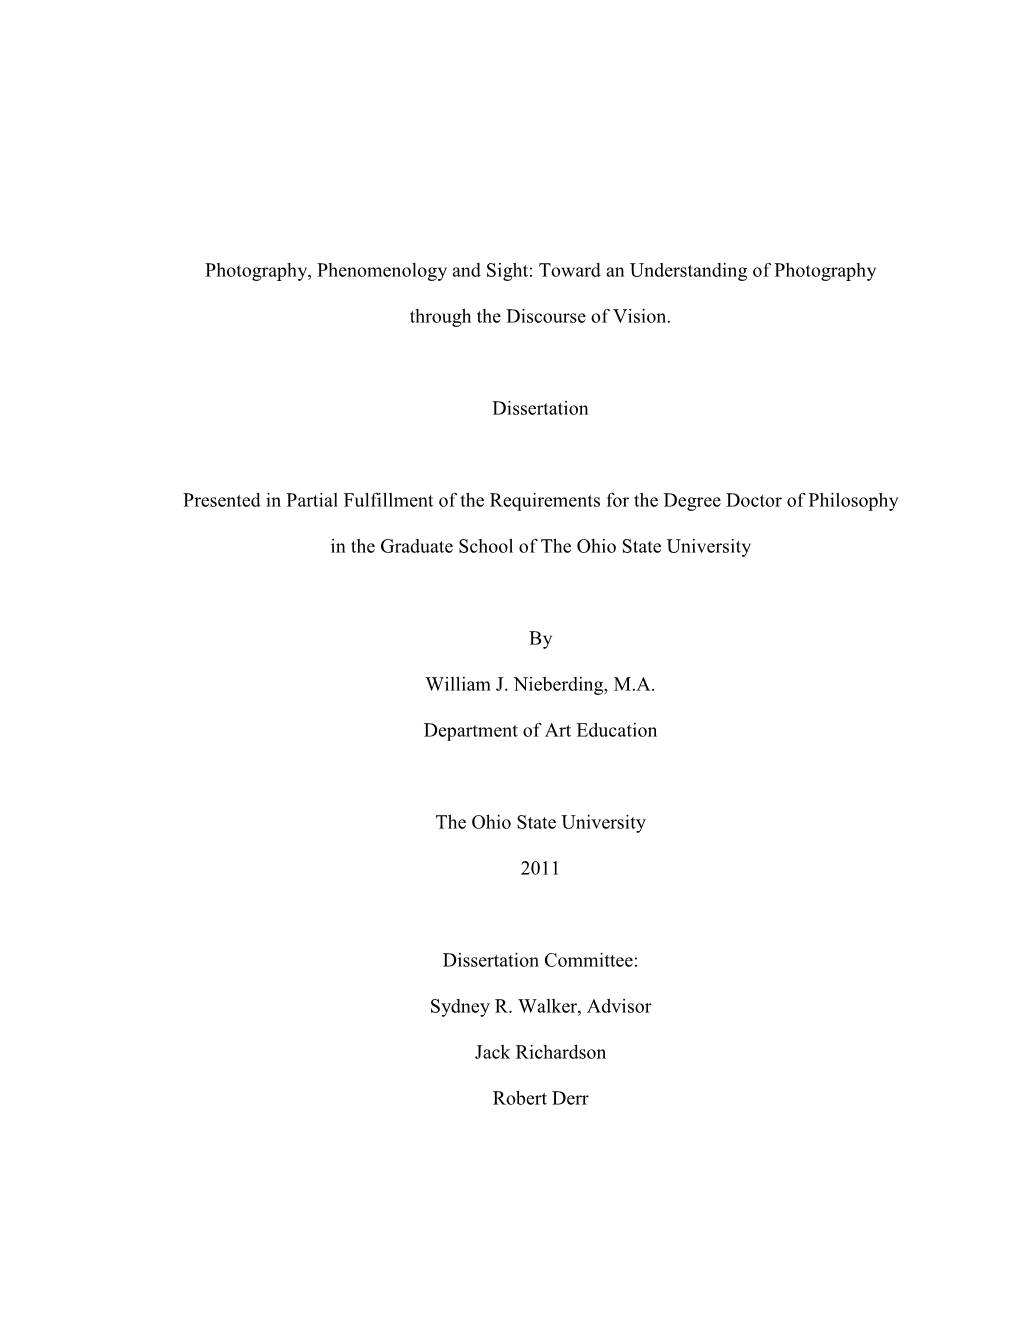 Photography, Phenomenology and Sight: Toward an Understanding of Photography